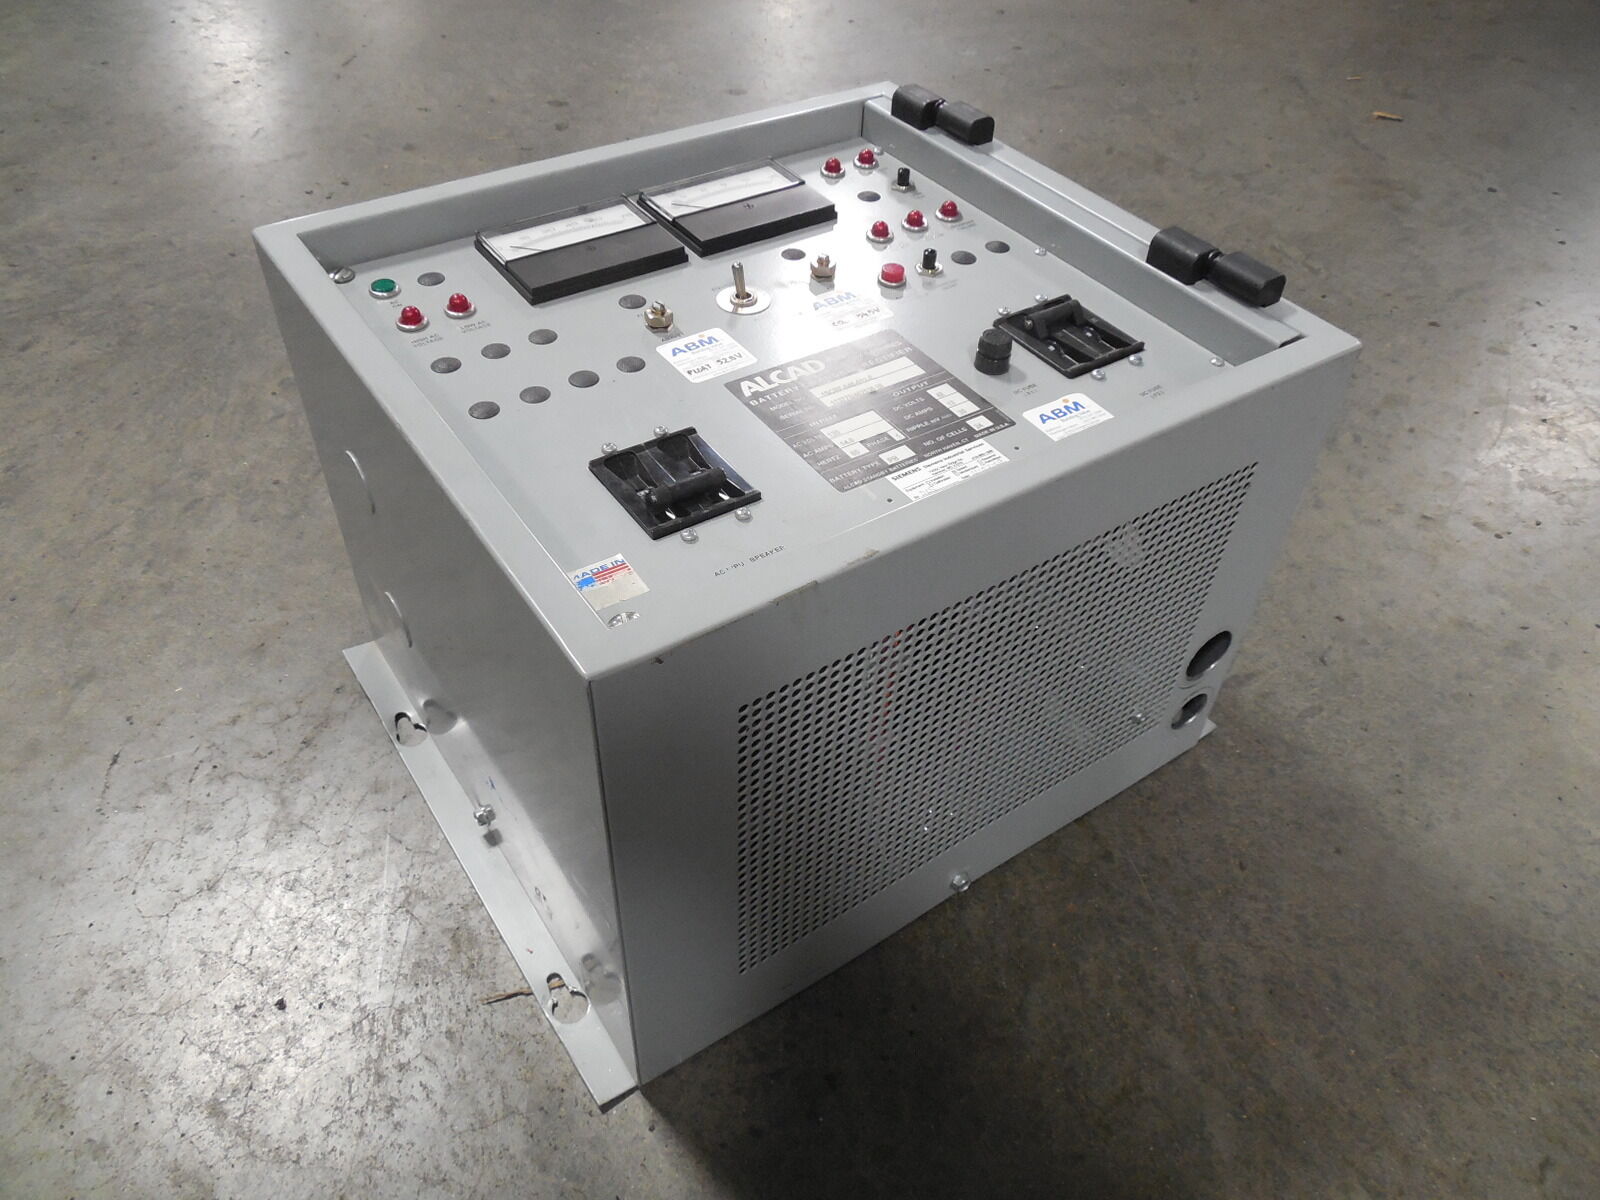 USED Alcad 1SCRF-048-012-E Battery Rectifier Charger Spasm price Unit Special sale item 48VD